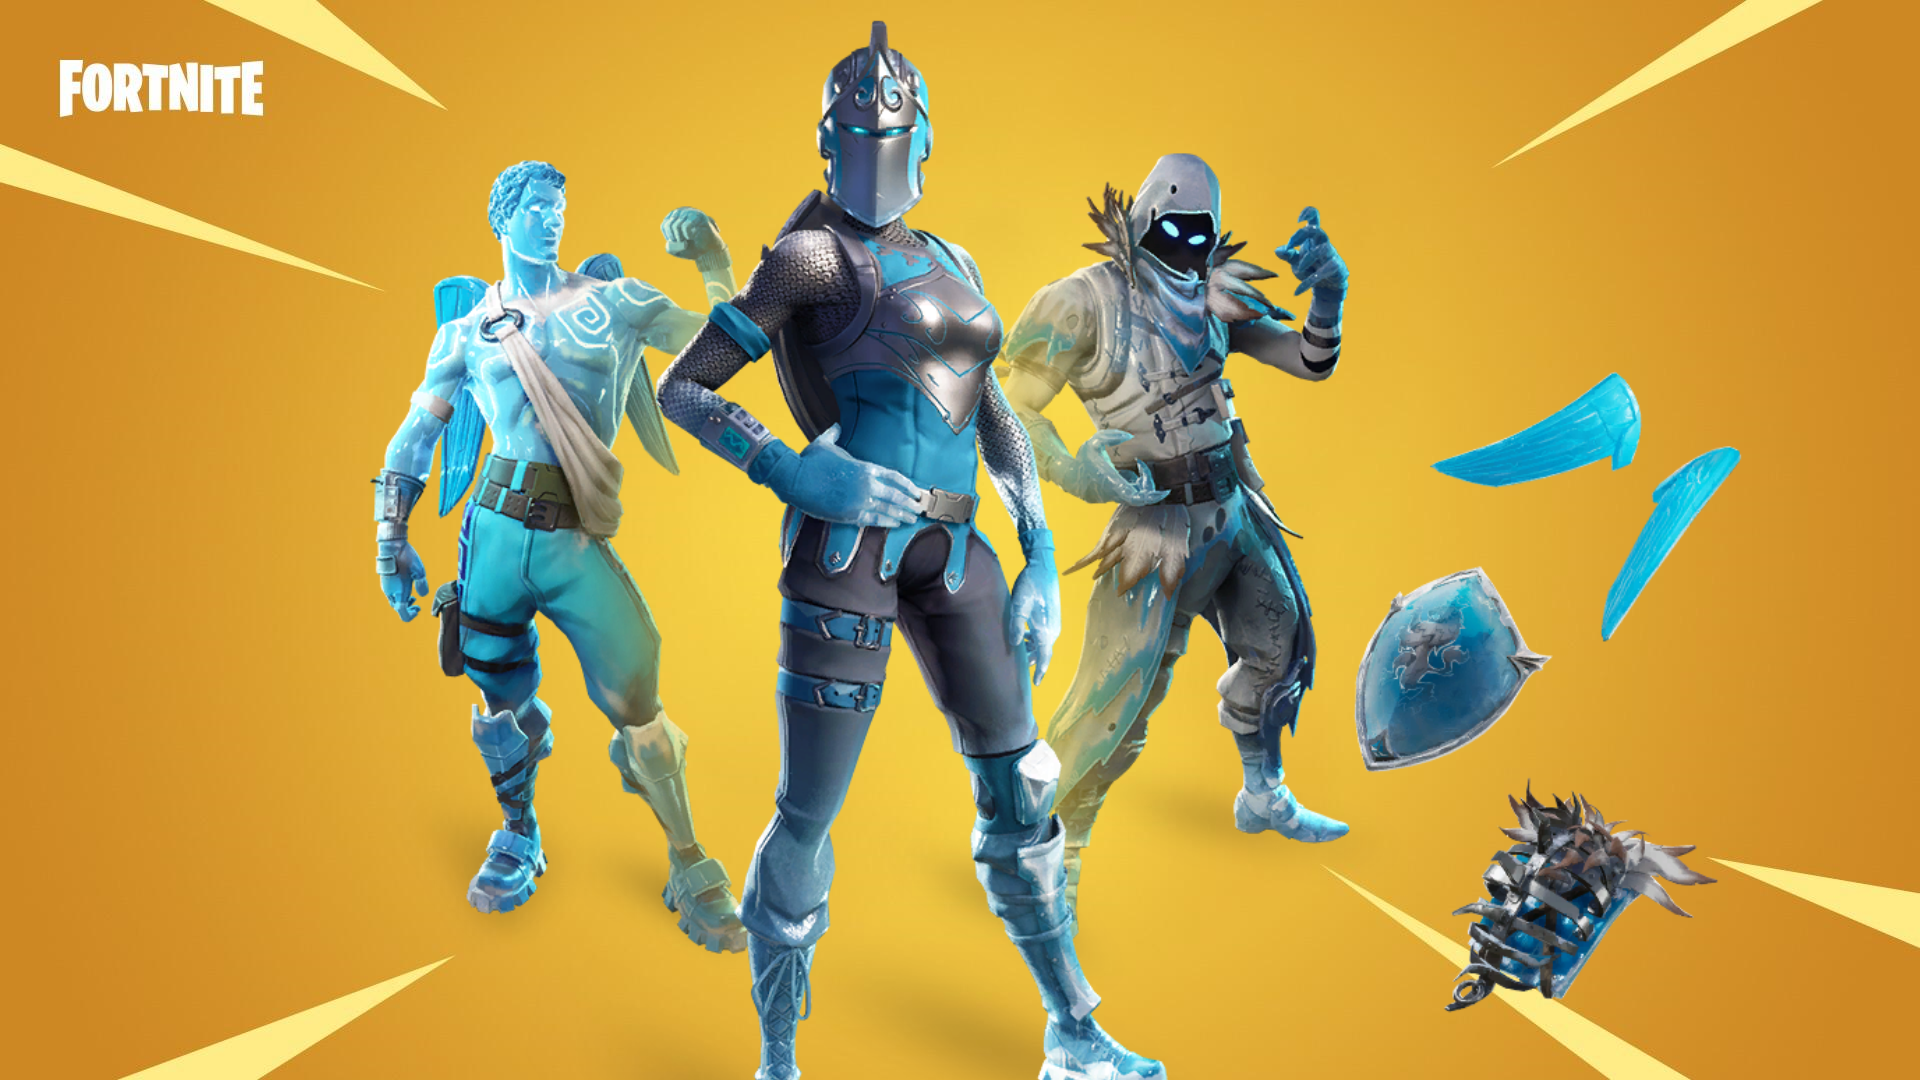 the frozen legends bundle might be on sale for real money only leaks show - fortnite vbuck sale